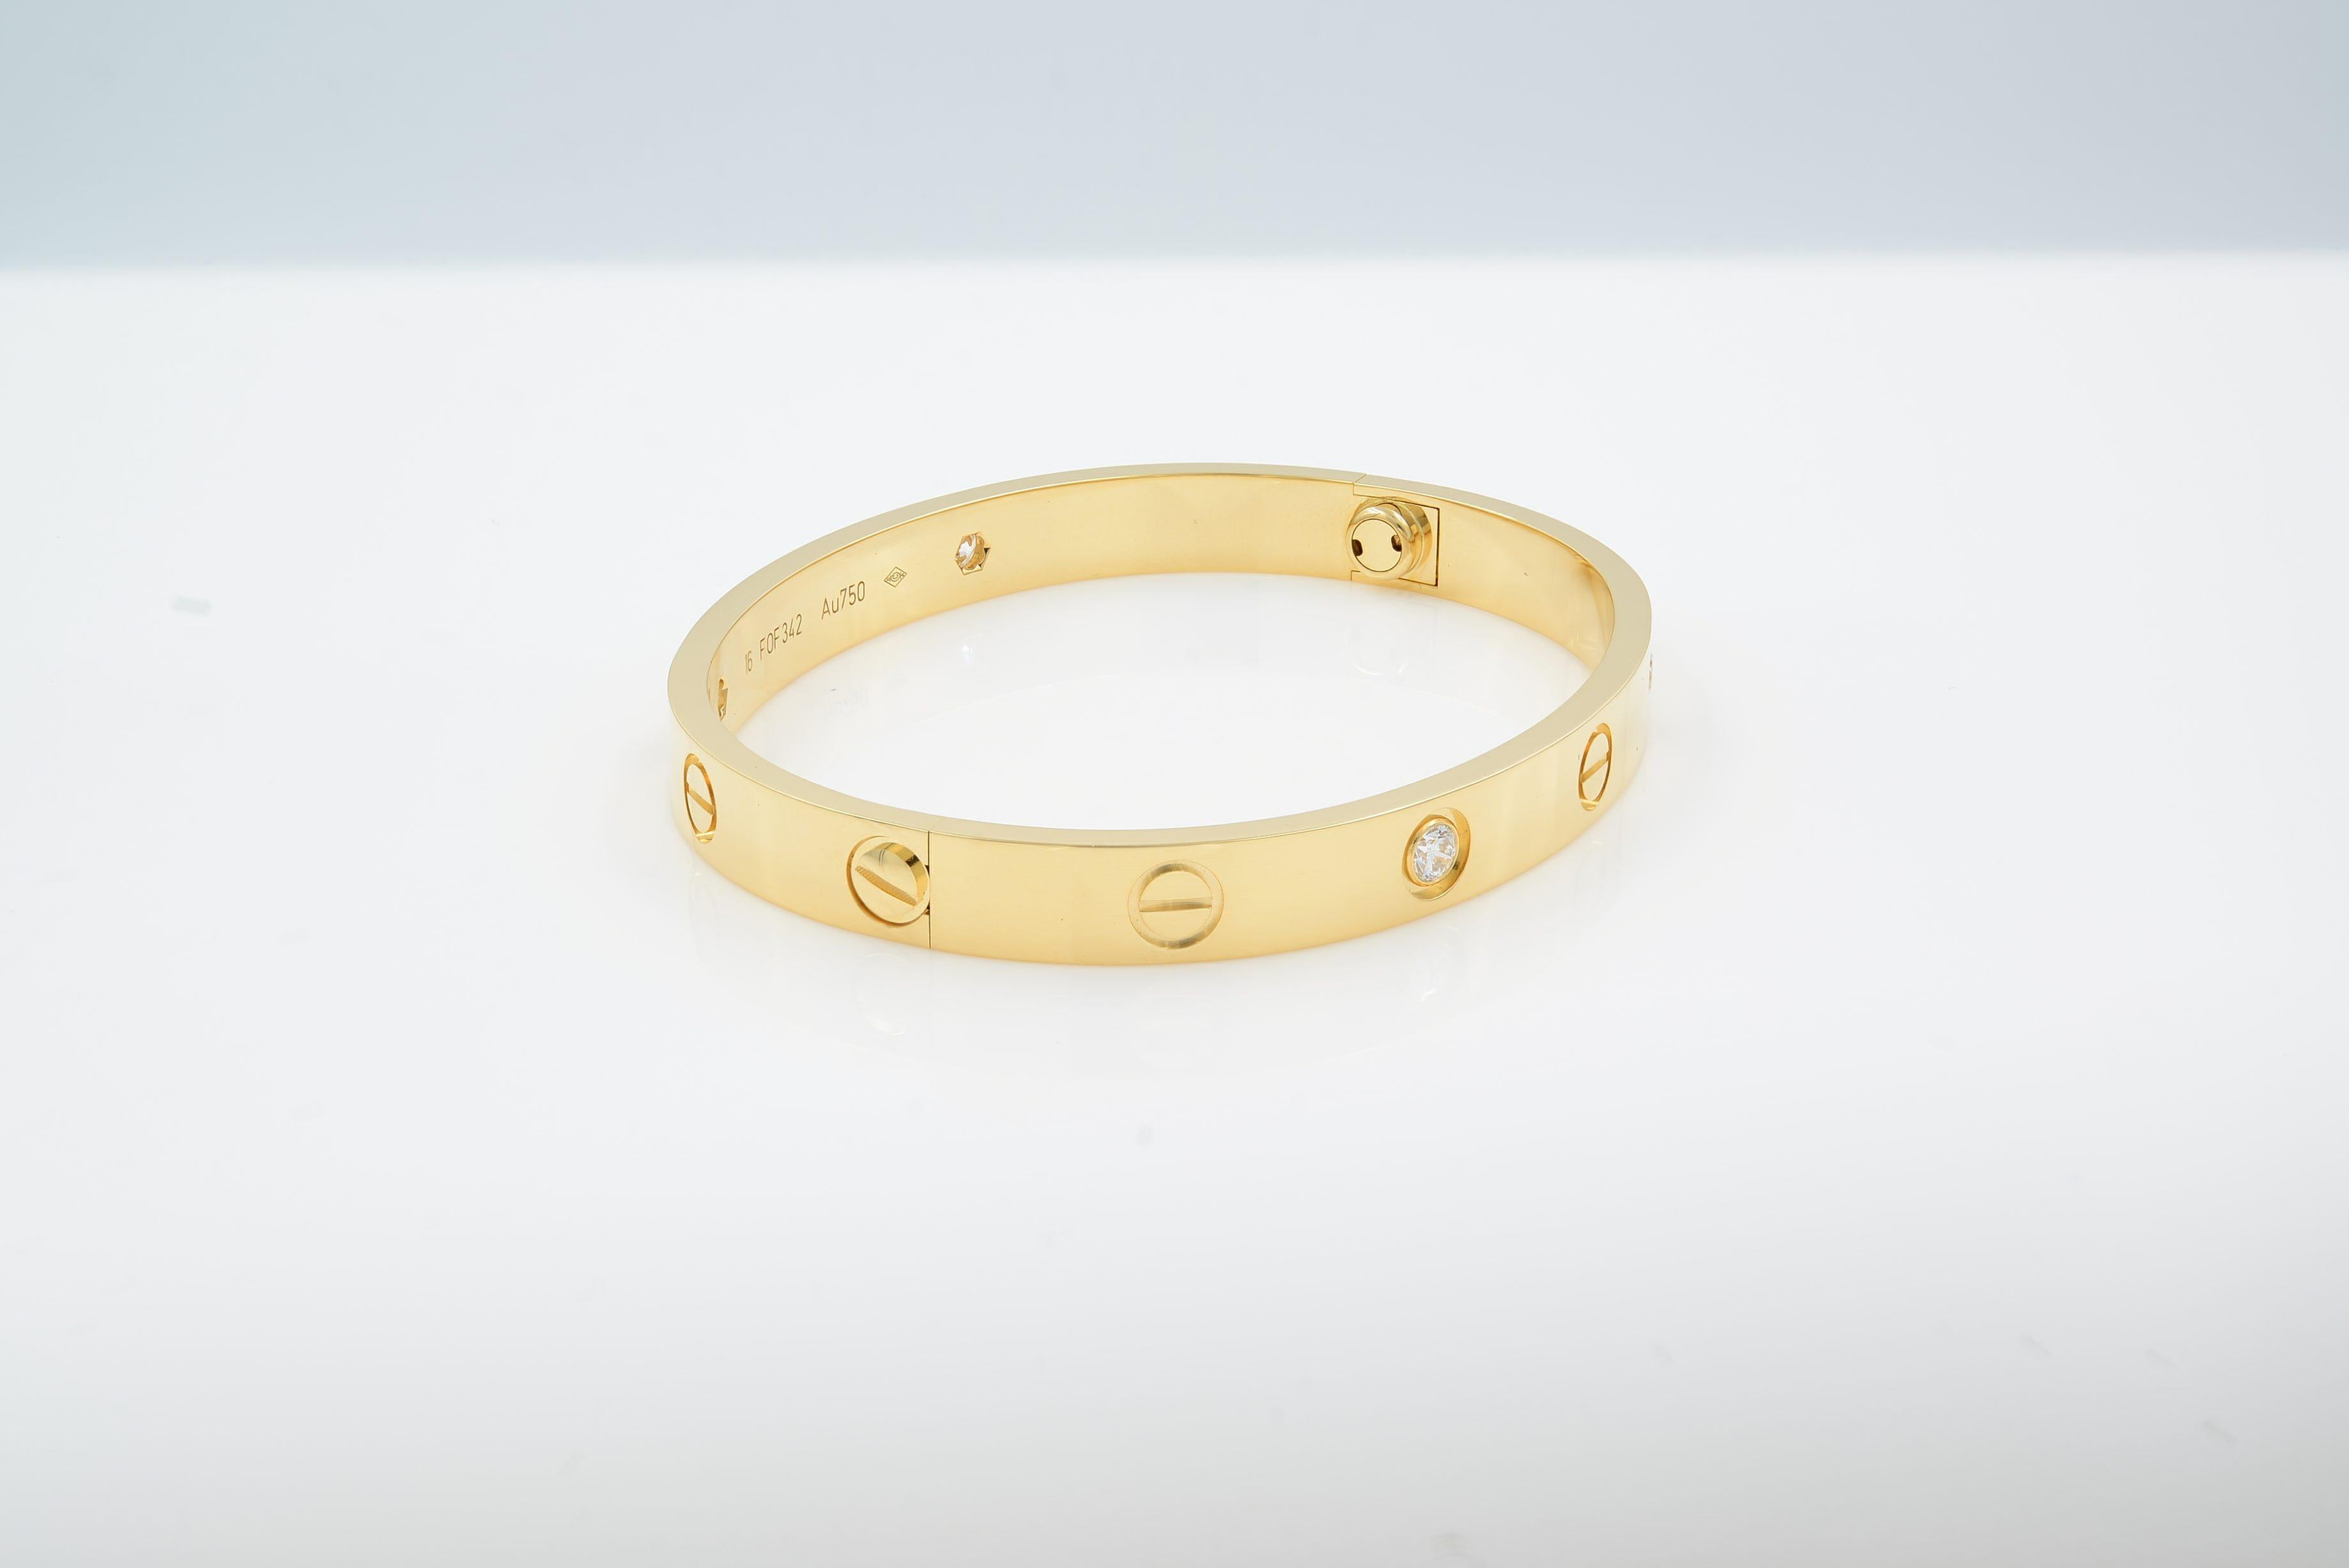 Love collection bracelets are surrounded with lore. As the story goes, they could at first only be purchased by couples who would surrender the screwdrivers to one another. When Cartier introduced the bracelet, they further cemented its romantic